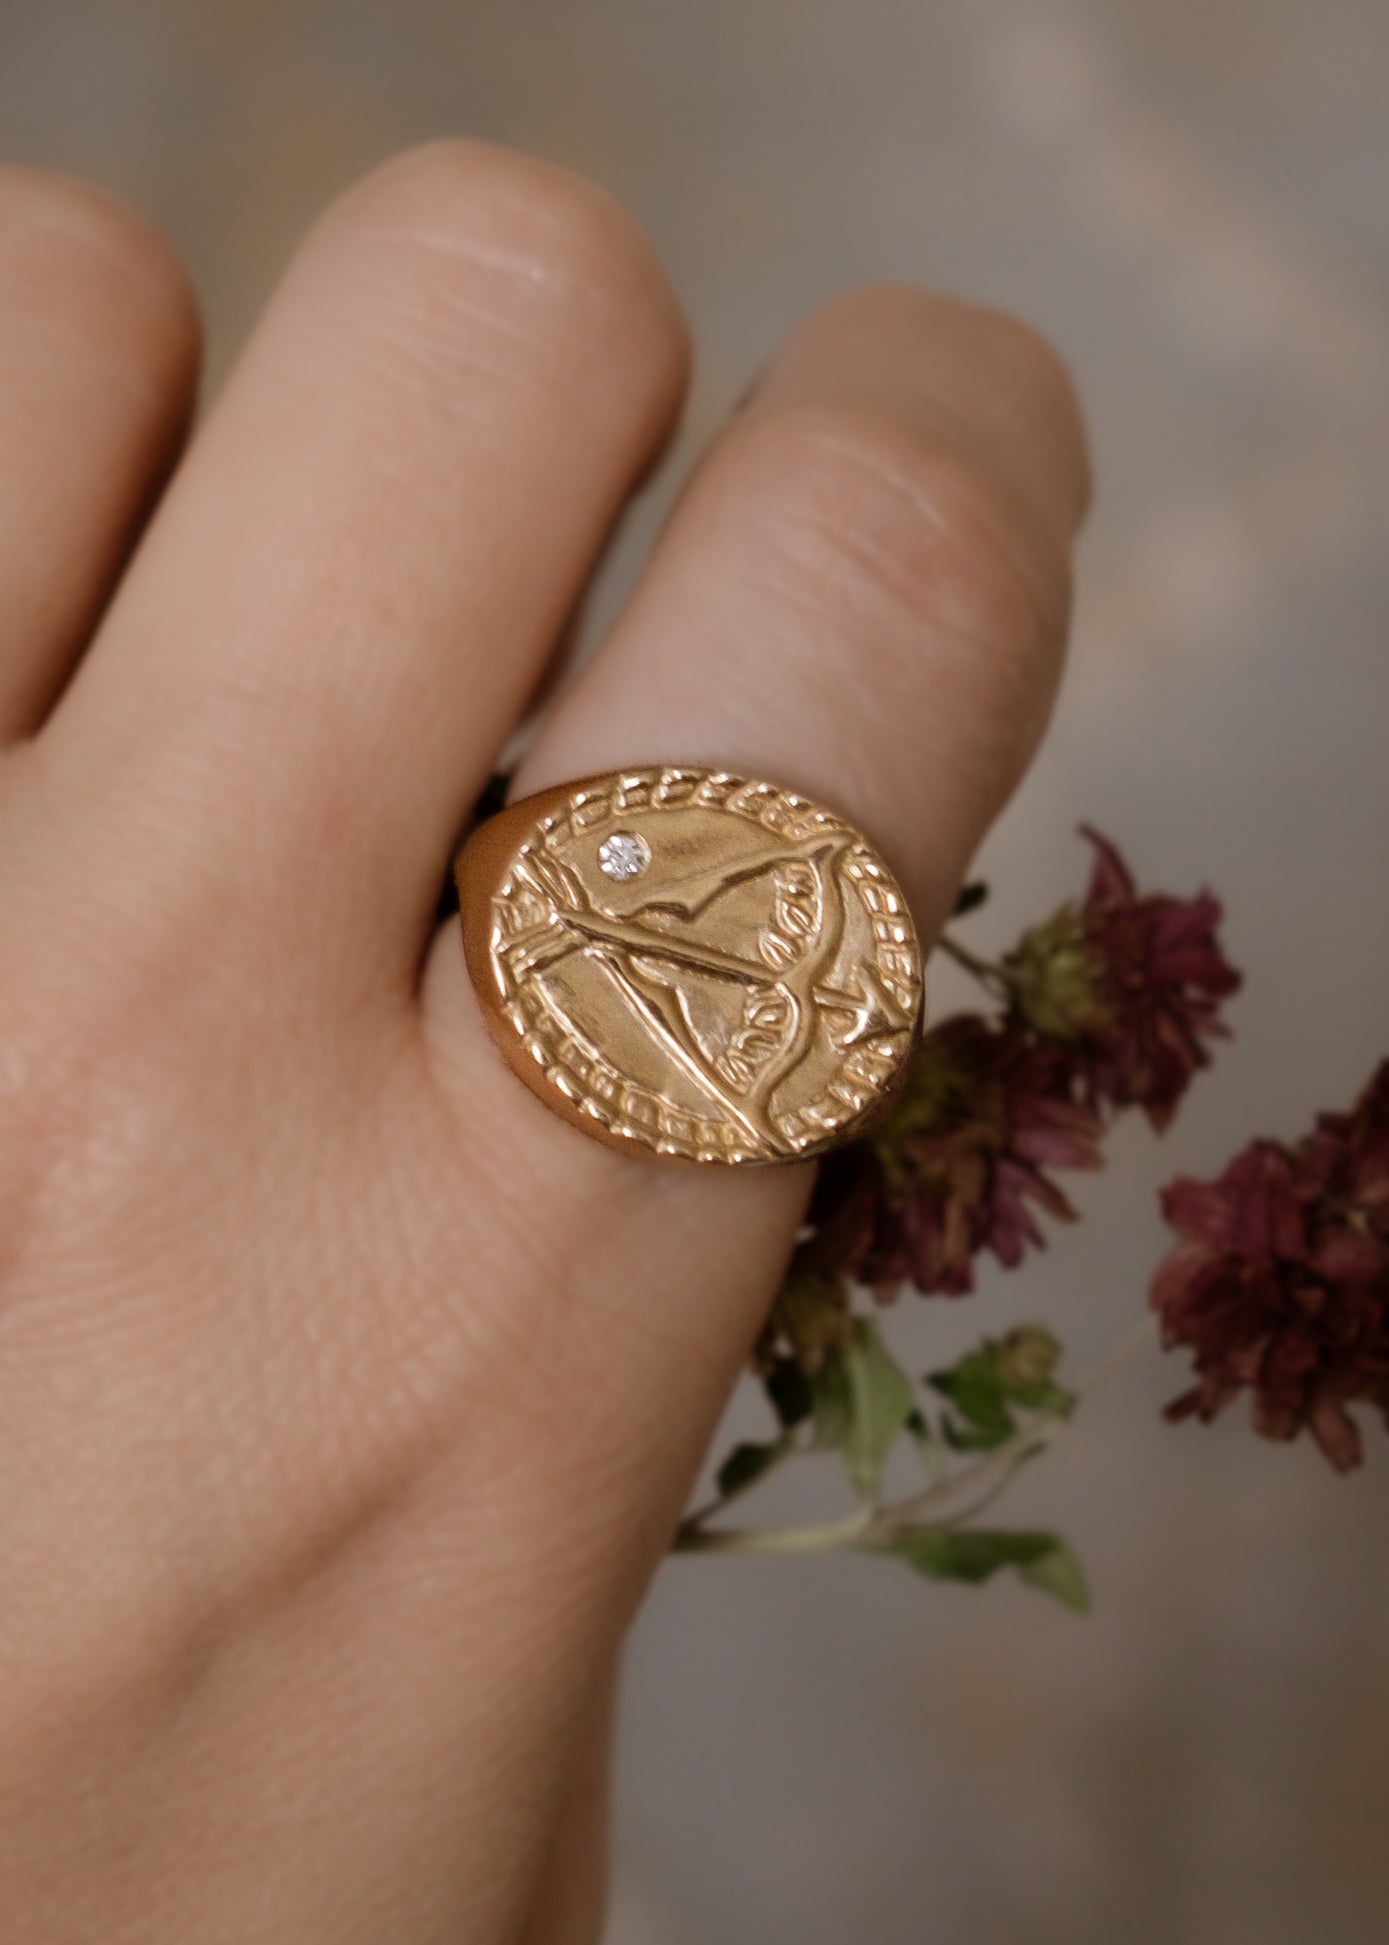 The ninth sign of the Zodiac, fire sign Sagittarius is a passionate traveler whose natural curiosity ignites their adventures. A hand-detailed bow and arrow is accented with a precious diamond for a ring that captures the power of the celestial sky.